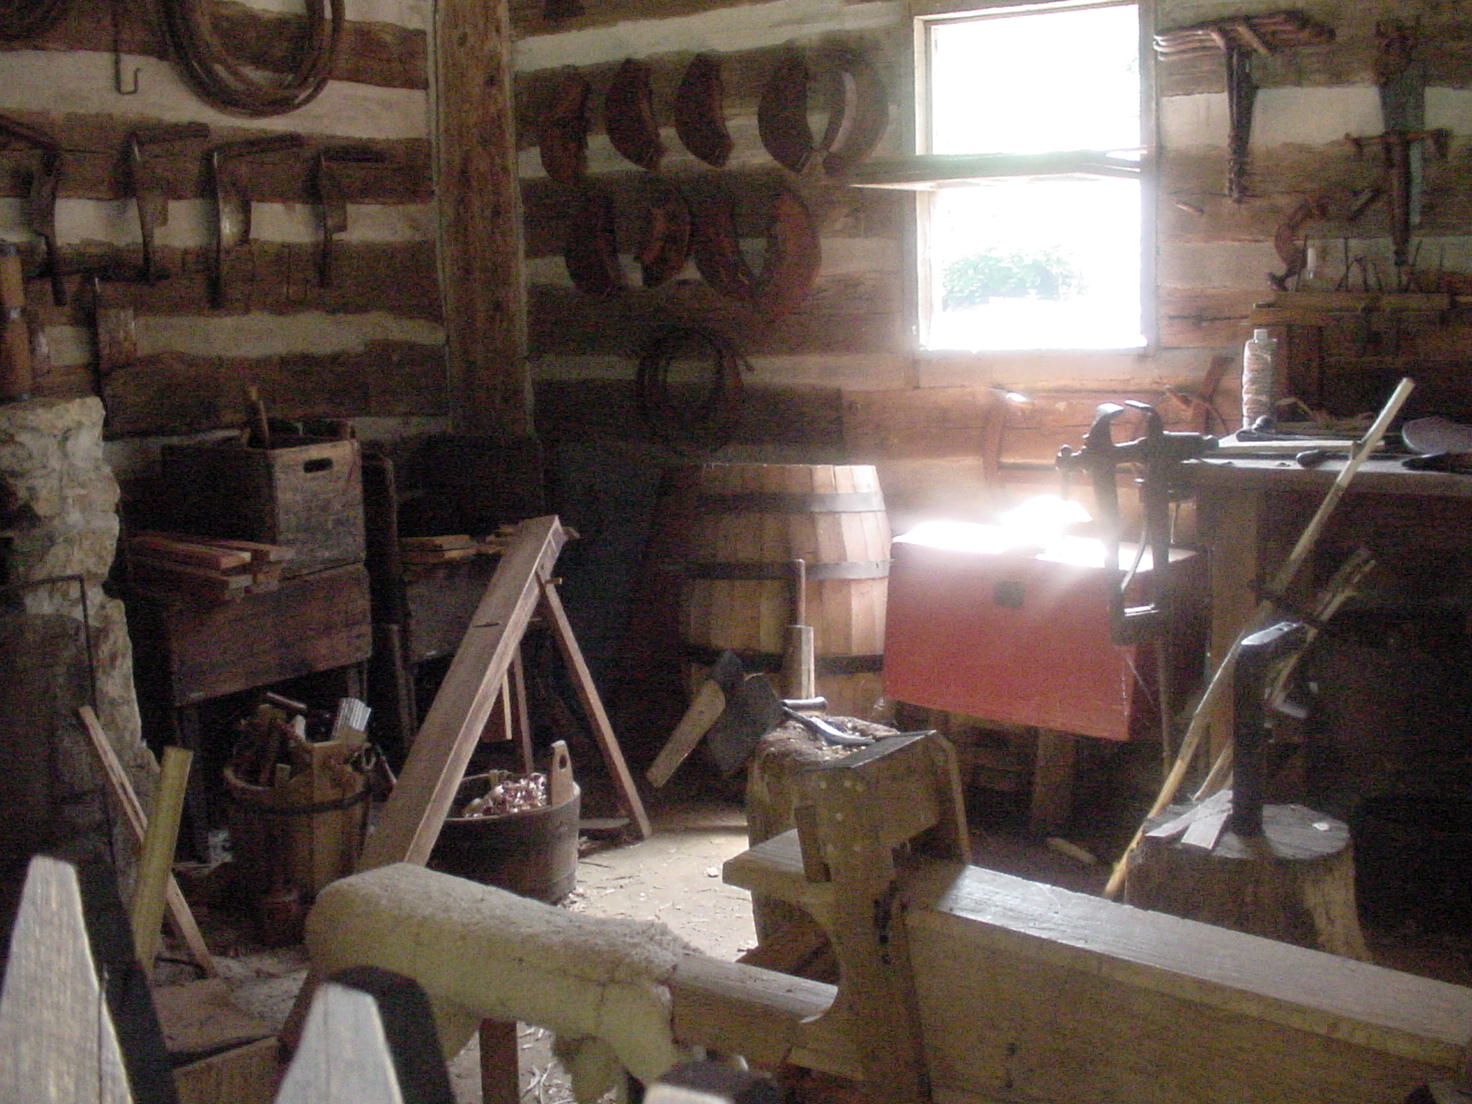 Although you cant see the barrels, this is the interior of the Onstot Cooper Shop.